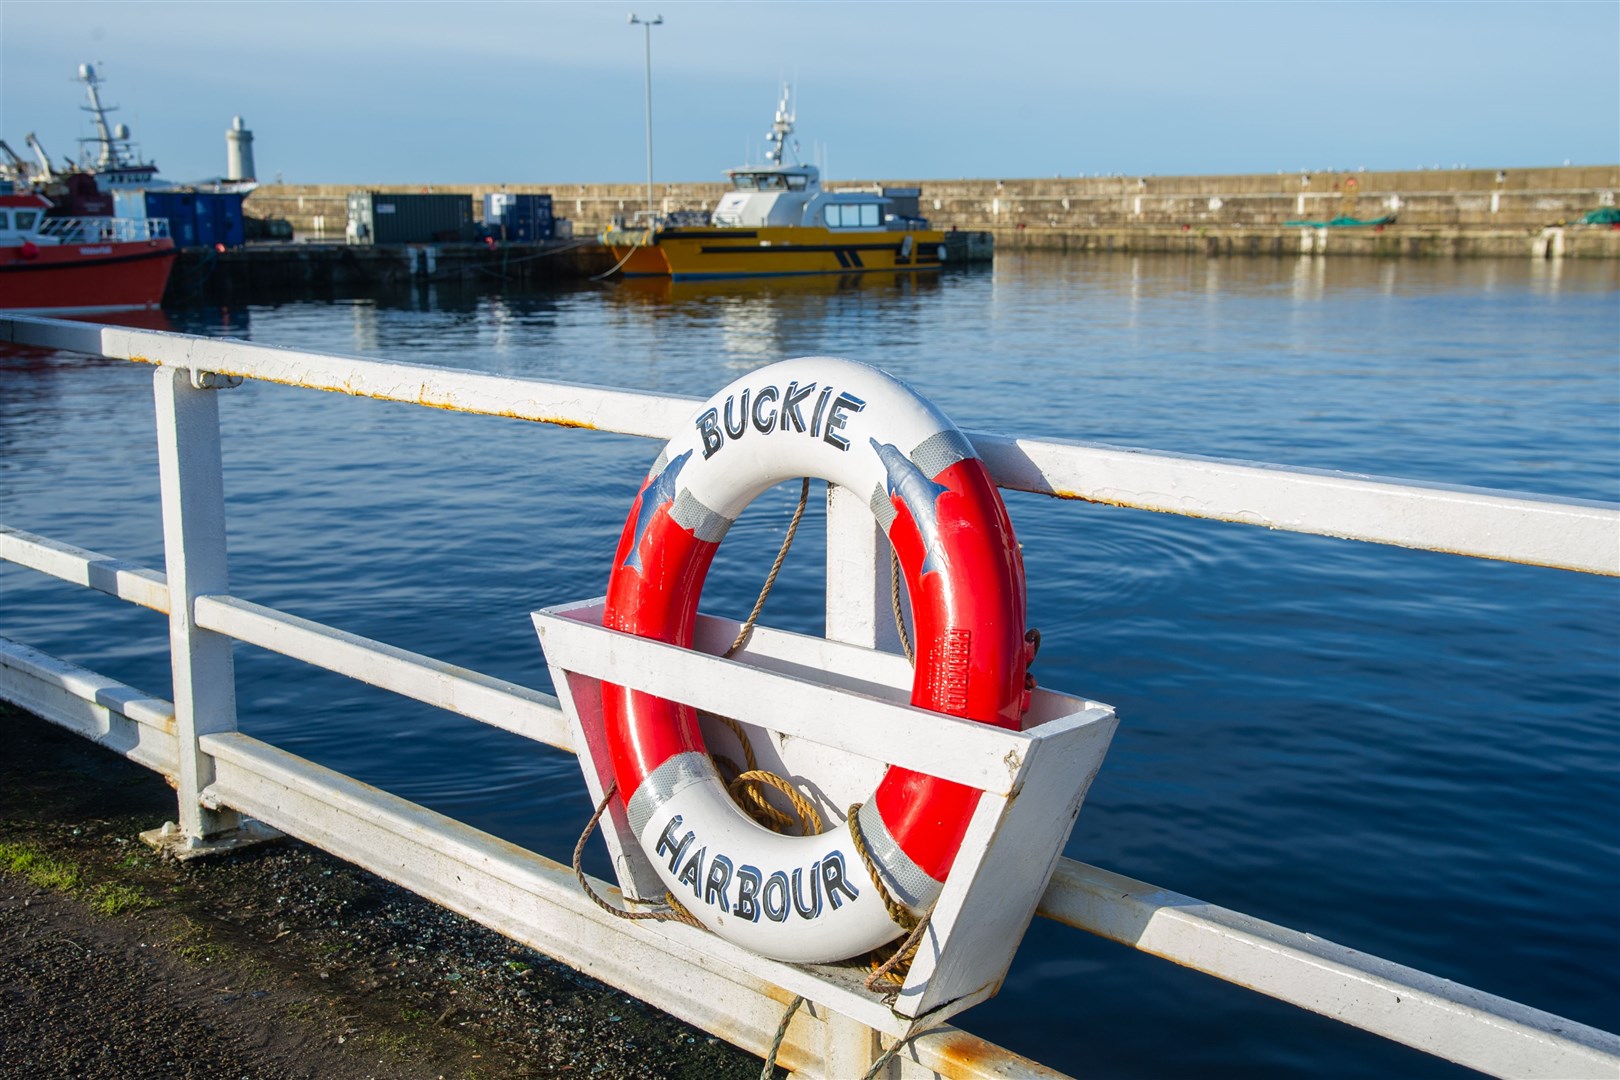 Over 450 boxes of fish were landed at Buckie Harbour last week. Picture: Daniel Forsyth